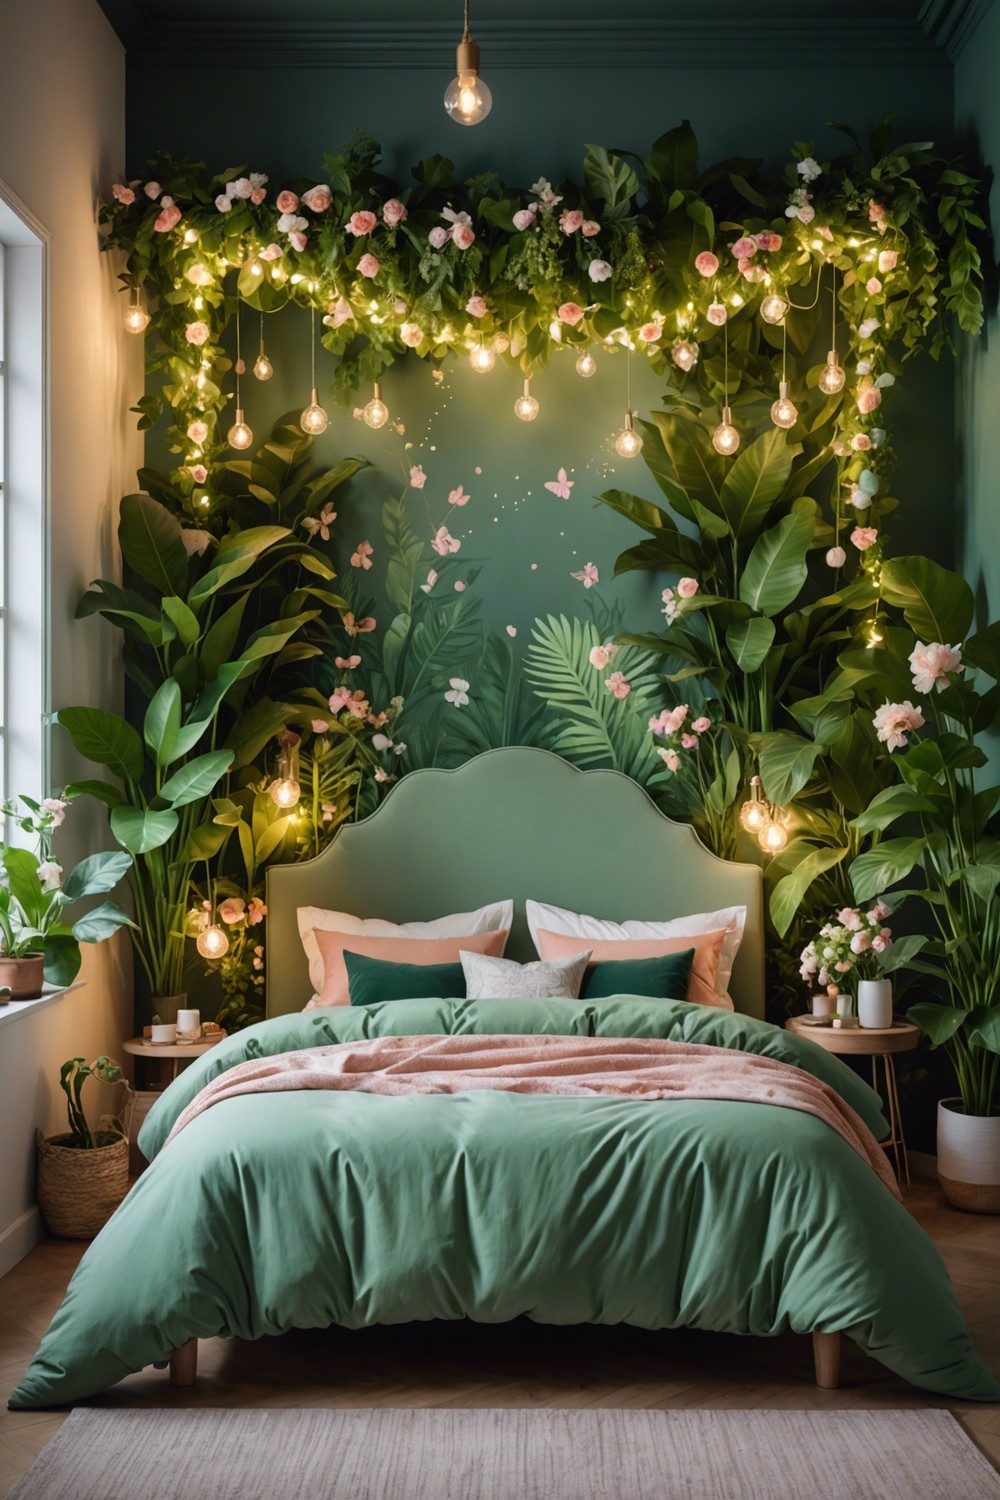 Nature-Inspired Oasis: Hanging Floral Lights above a Jungle Green Bed